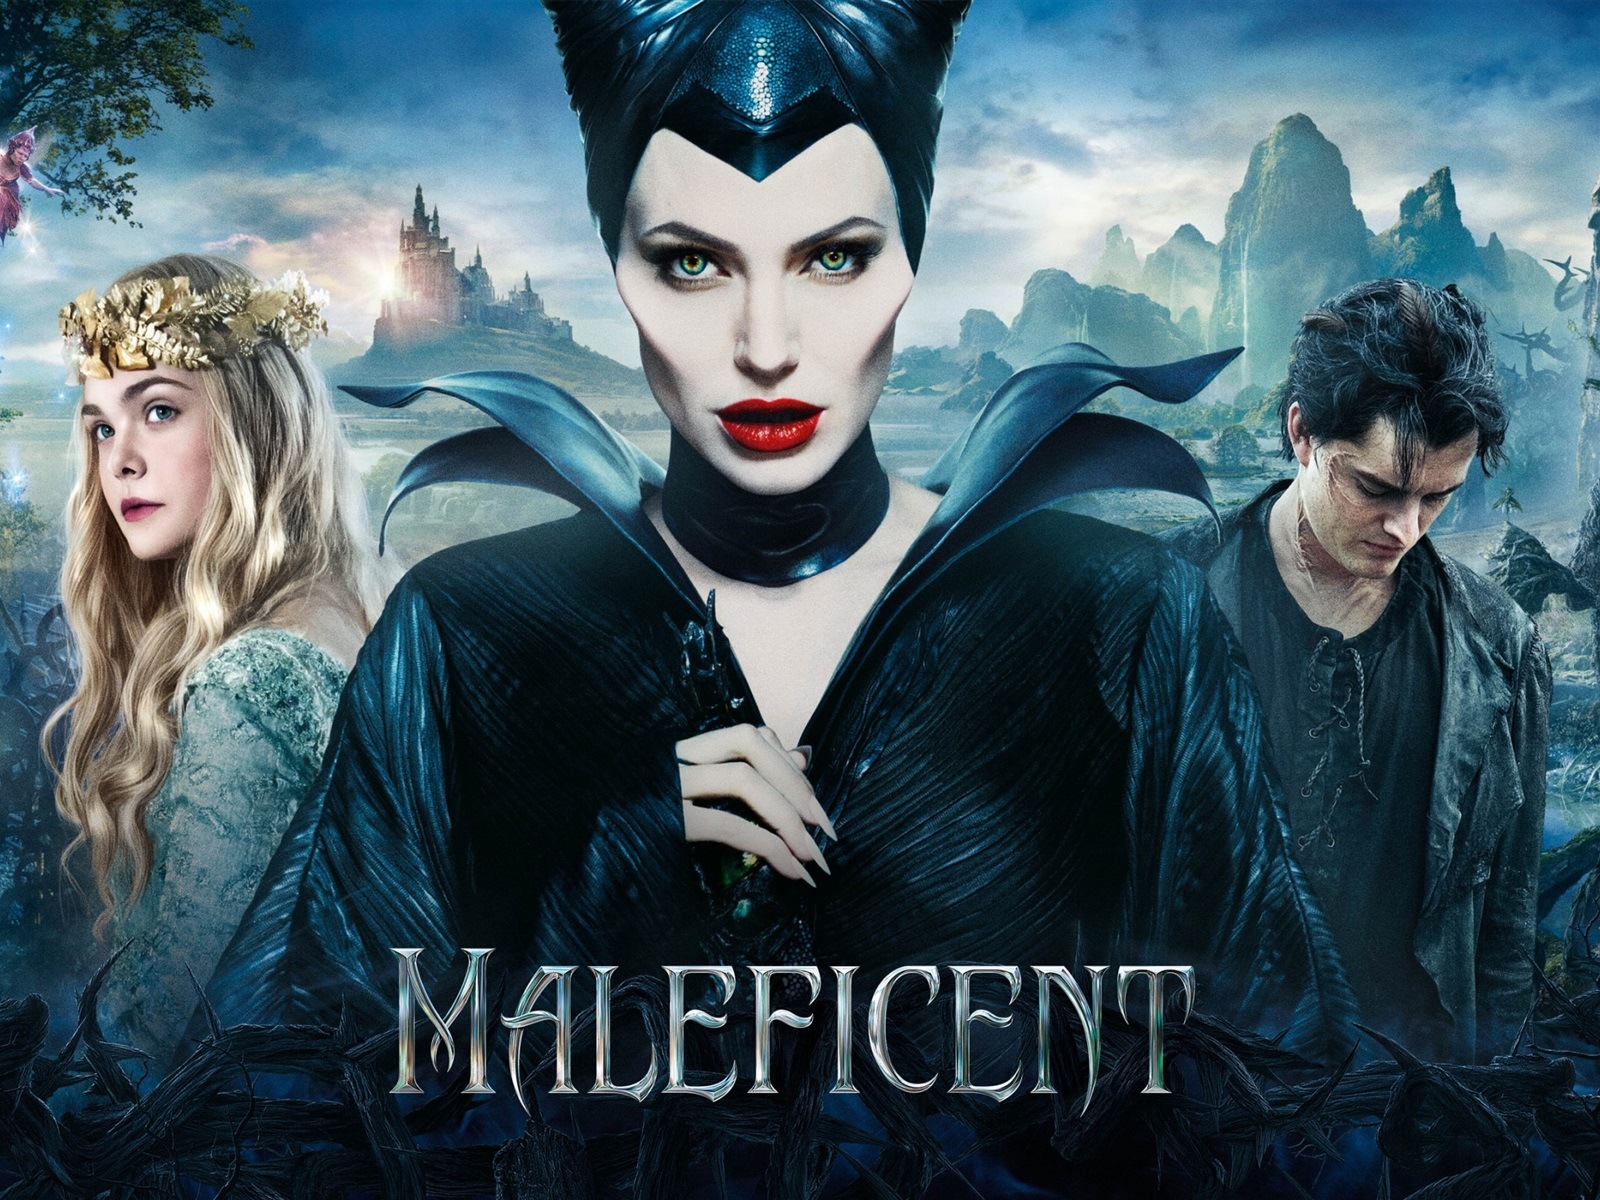 Maleficent 2014 HD movie wallpapers #1 - 1600x1200